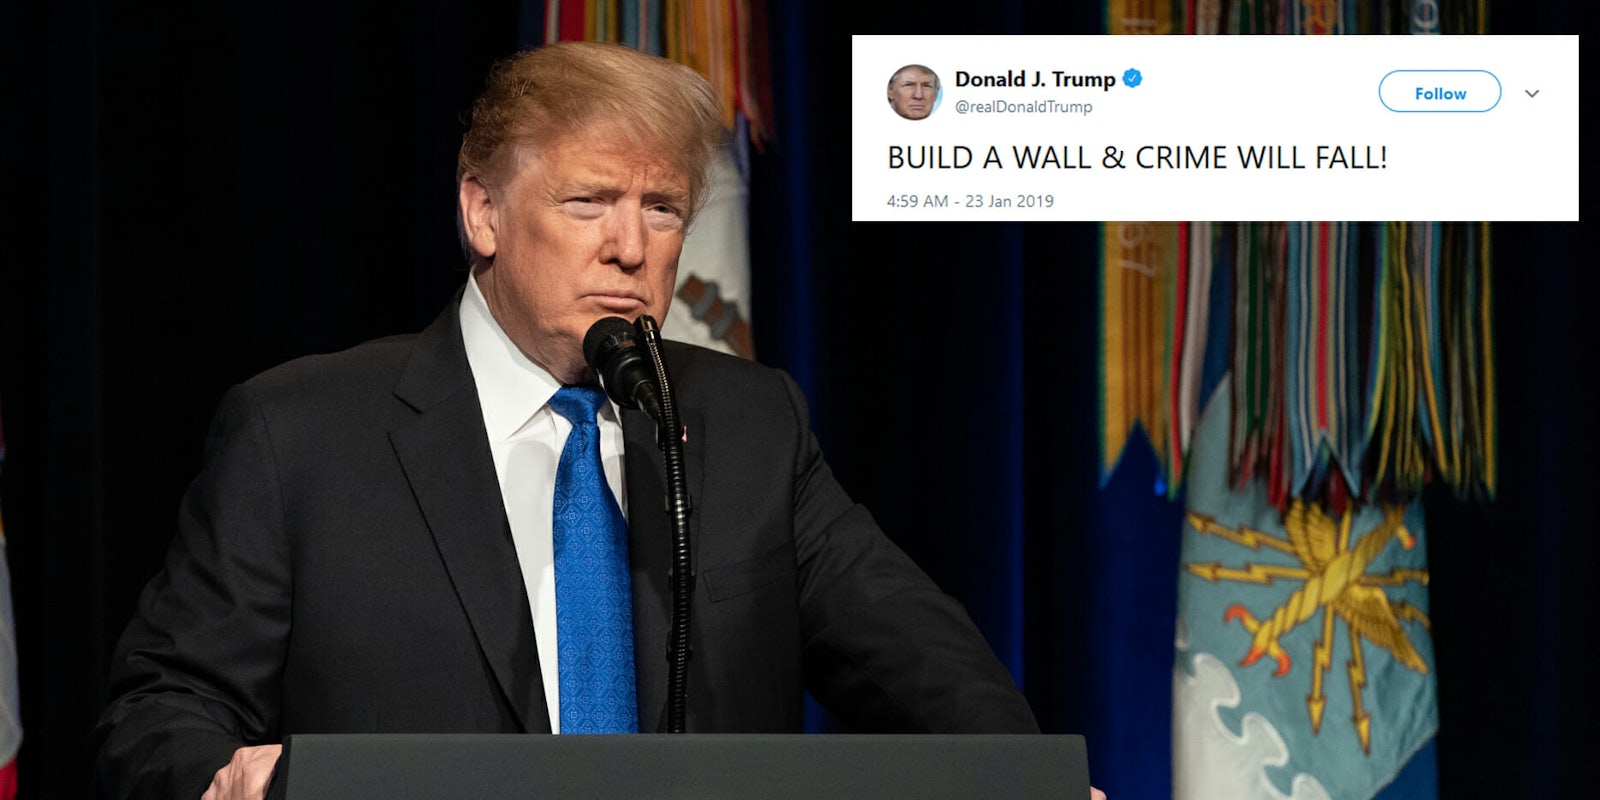 Buld a wall and crime will fall trump